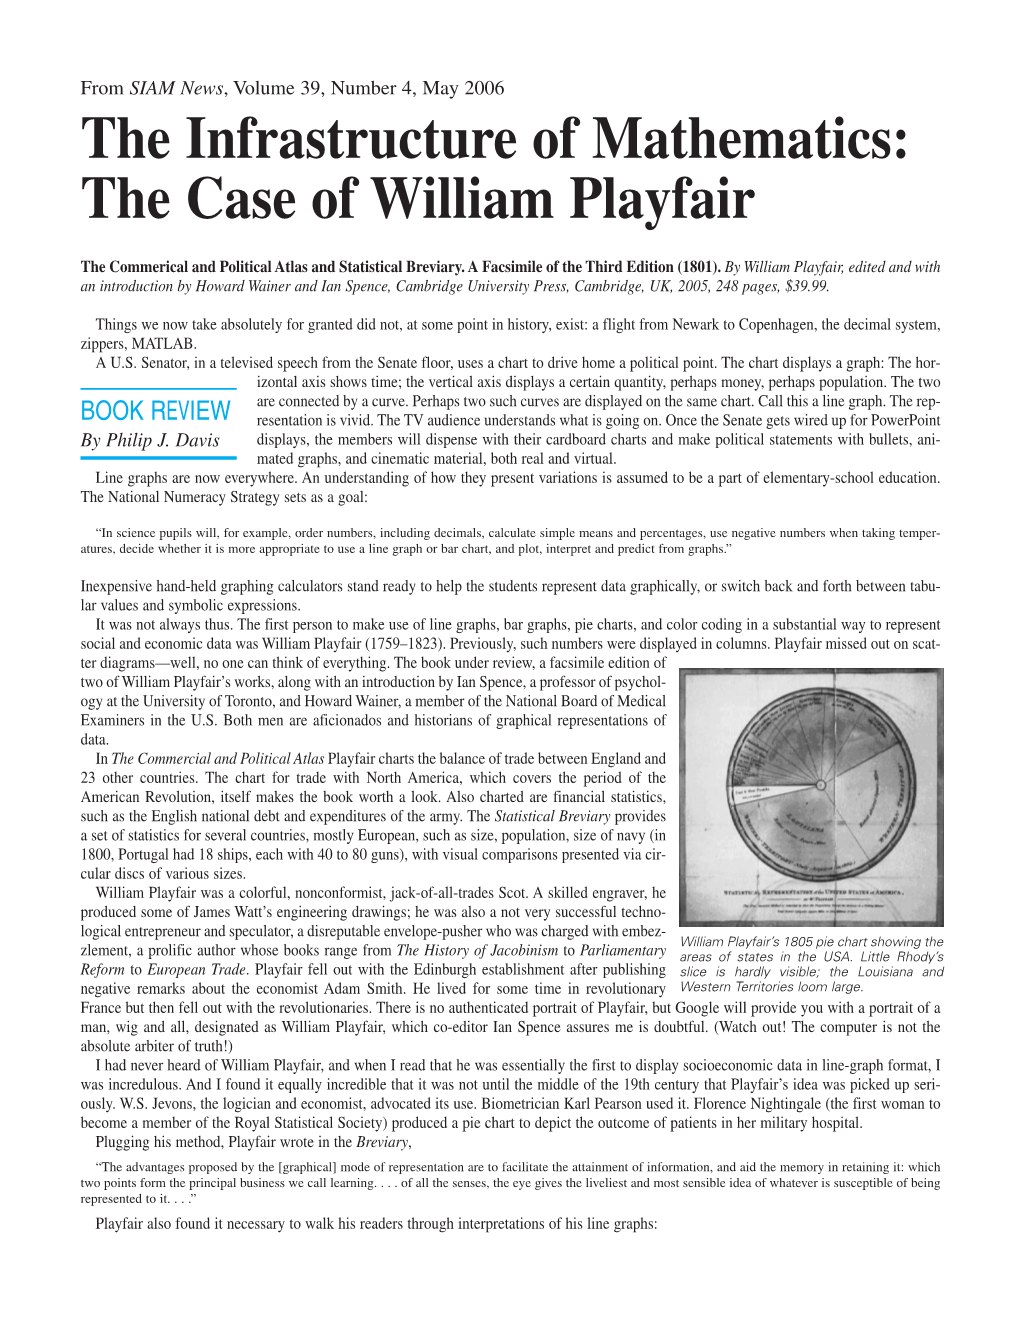 The Infrastructure of Mathematics: the Case of William Playfair